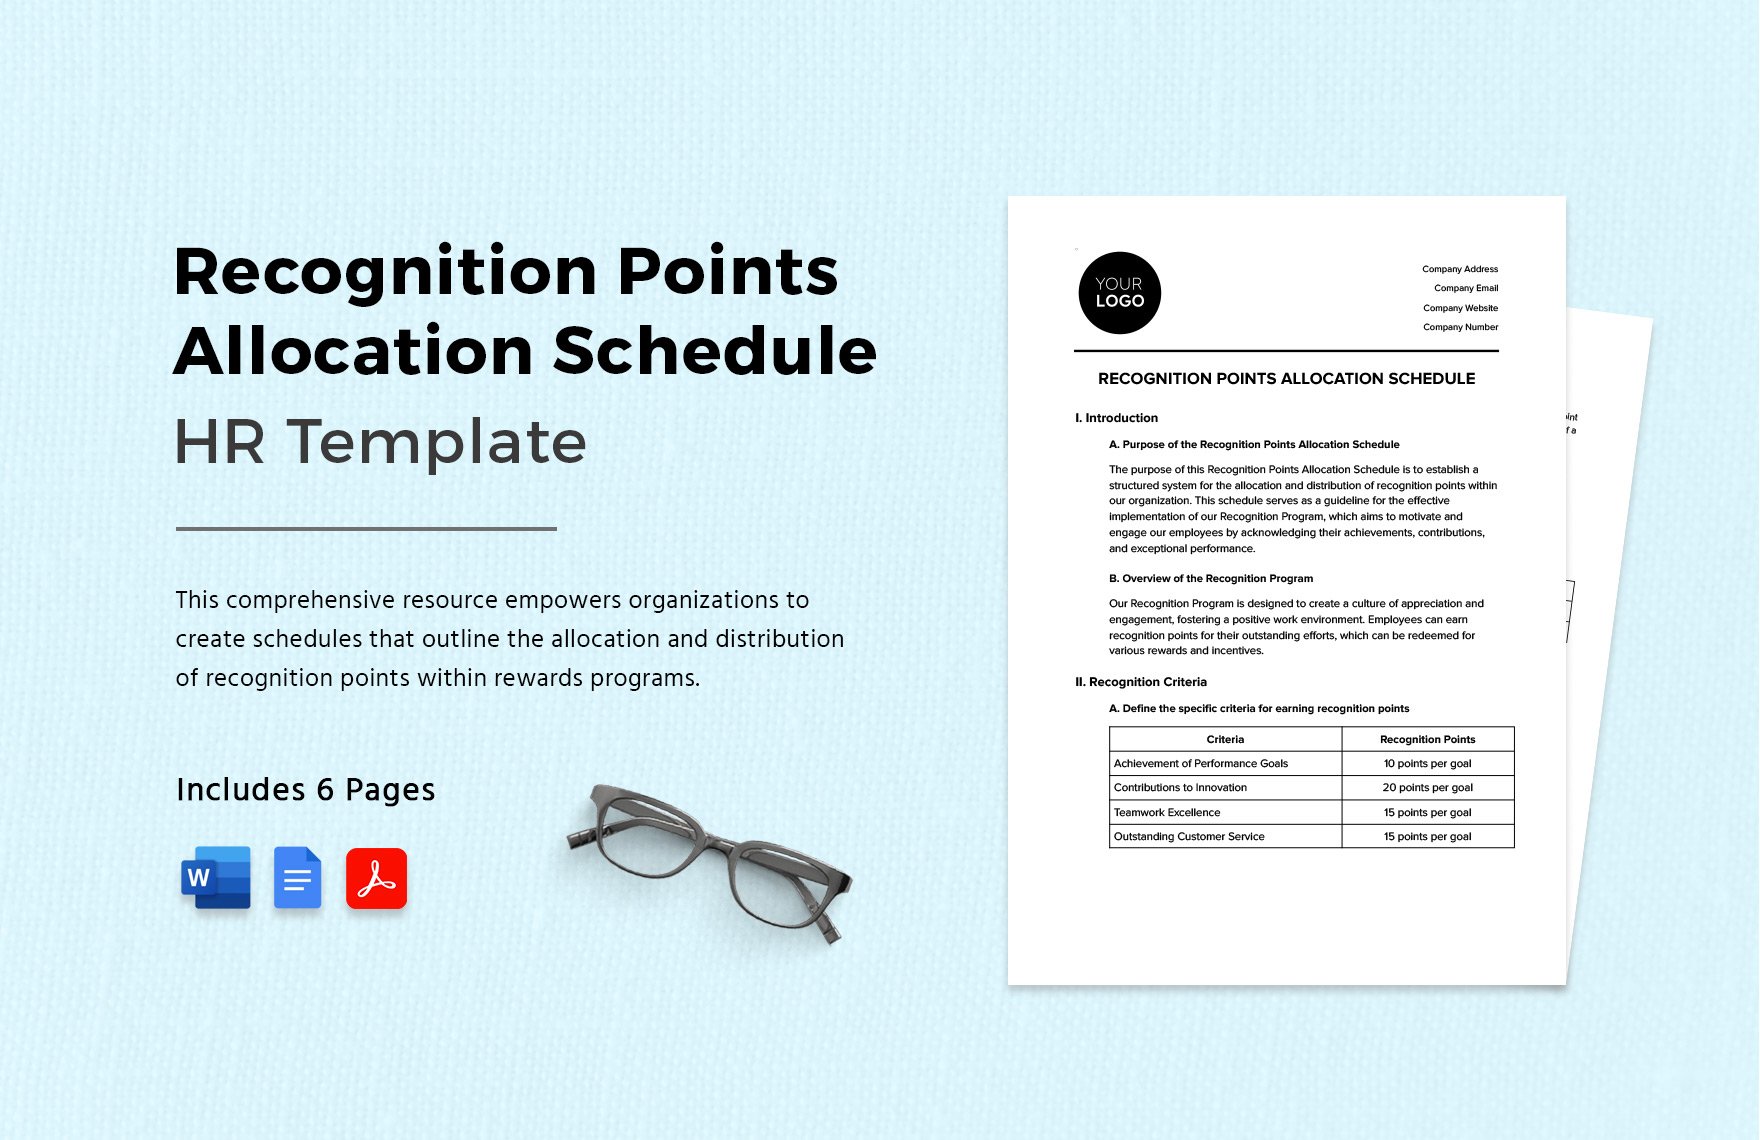 Recognition Points Allocation Schedule HR Template